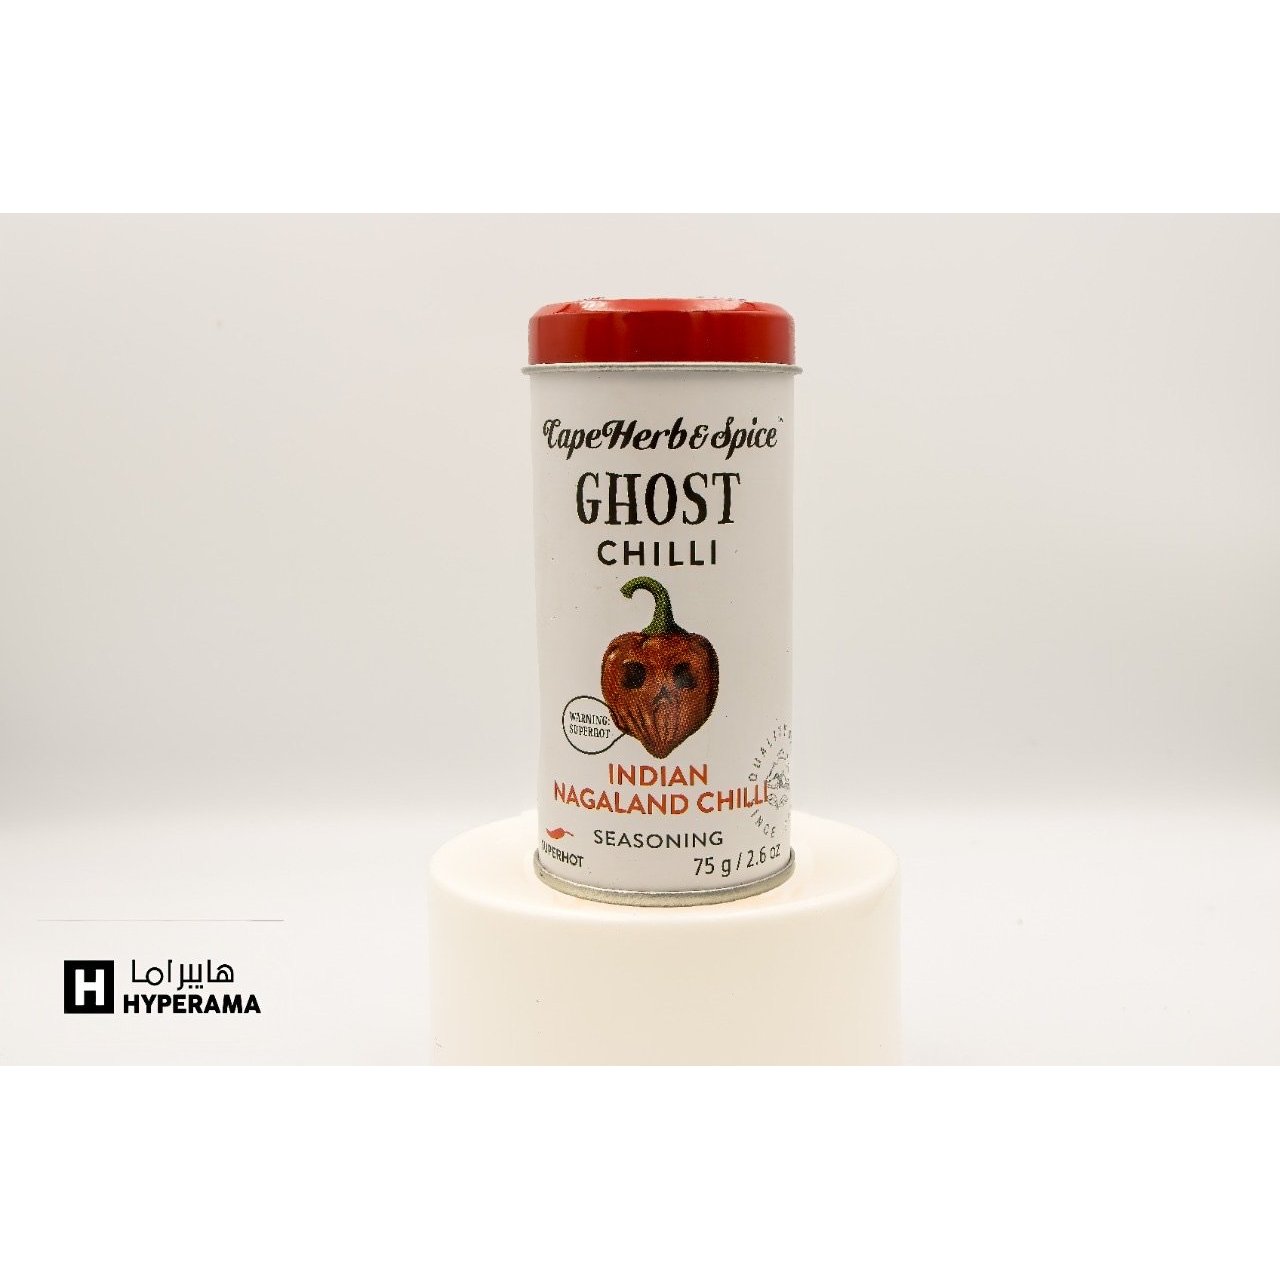 CAPE HERB & SPICE GHOST CHILLI INDIAN NAGALAND 75G